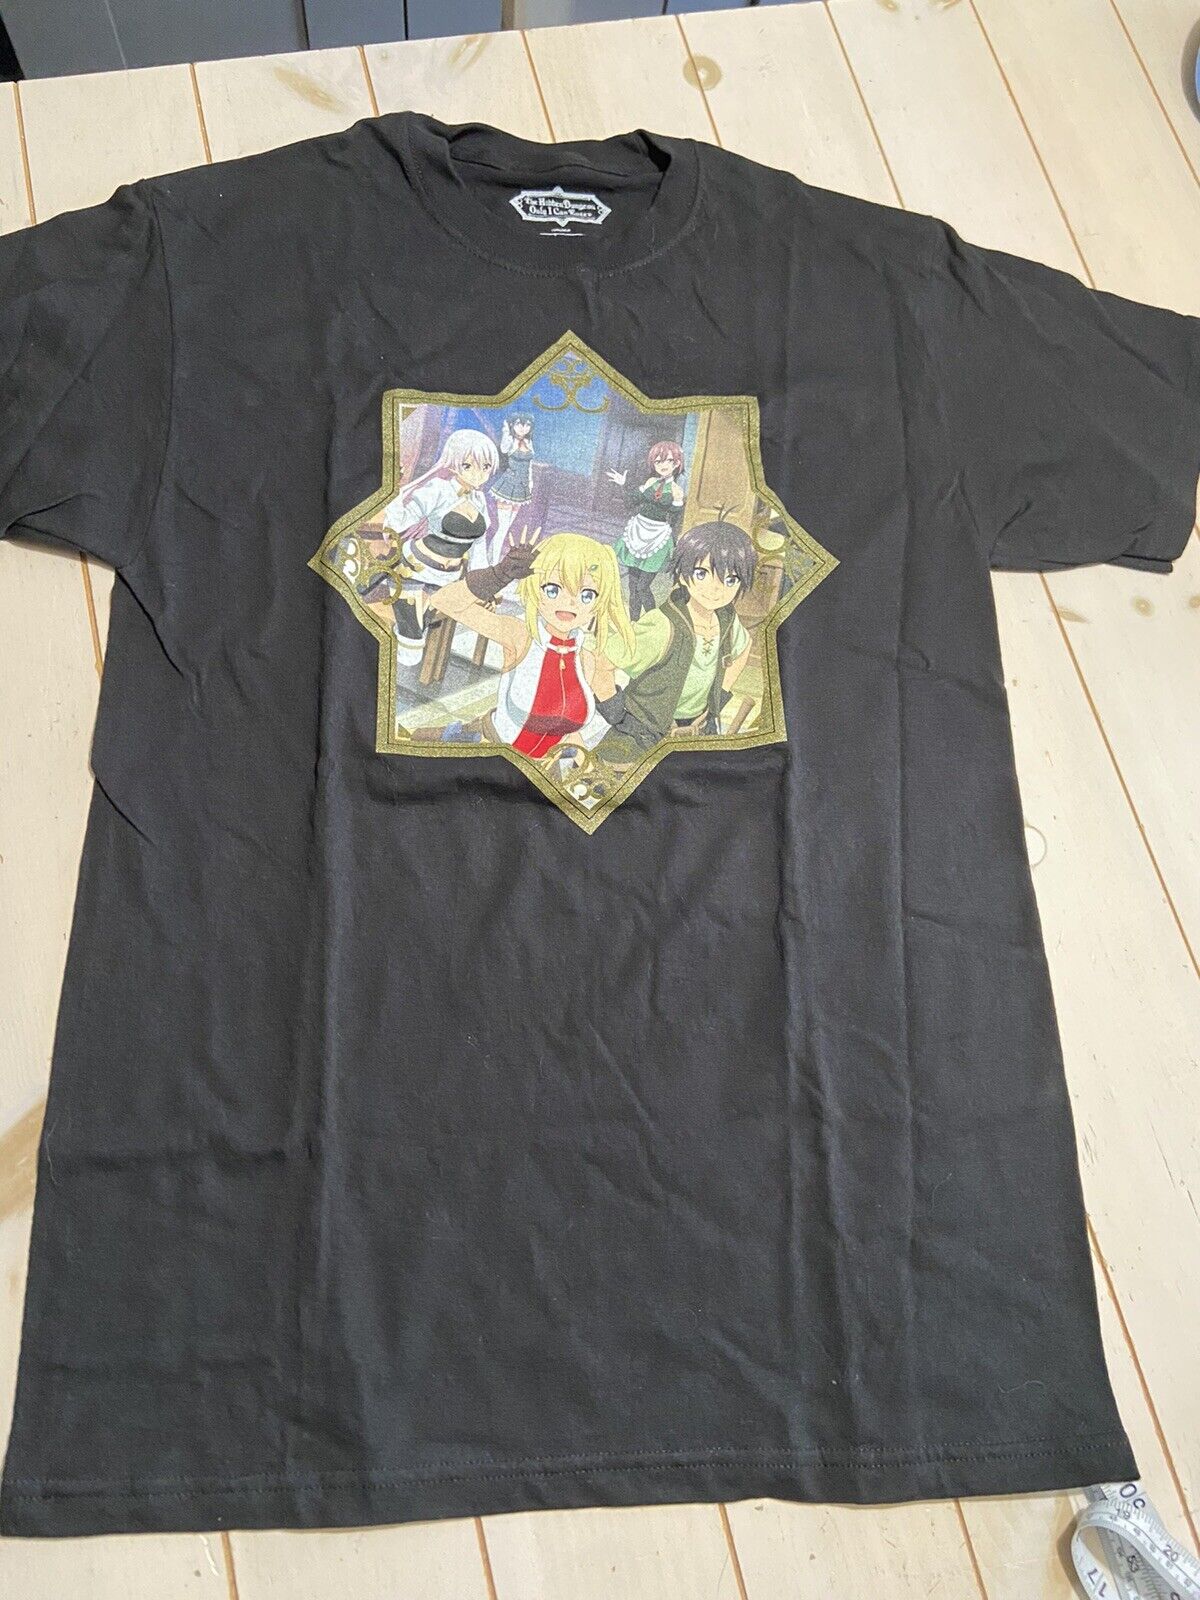 Crunchyroll Loot The Hidden Dungeon Only I Can Enter Anime T-Shirt Size S NWOT